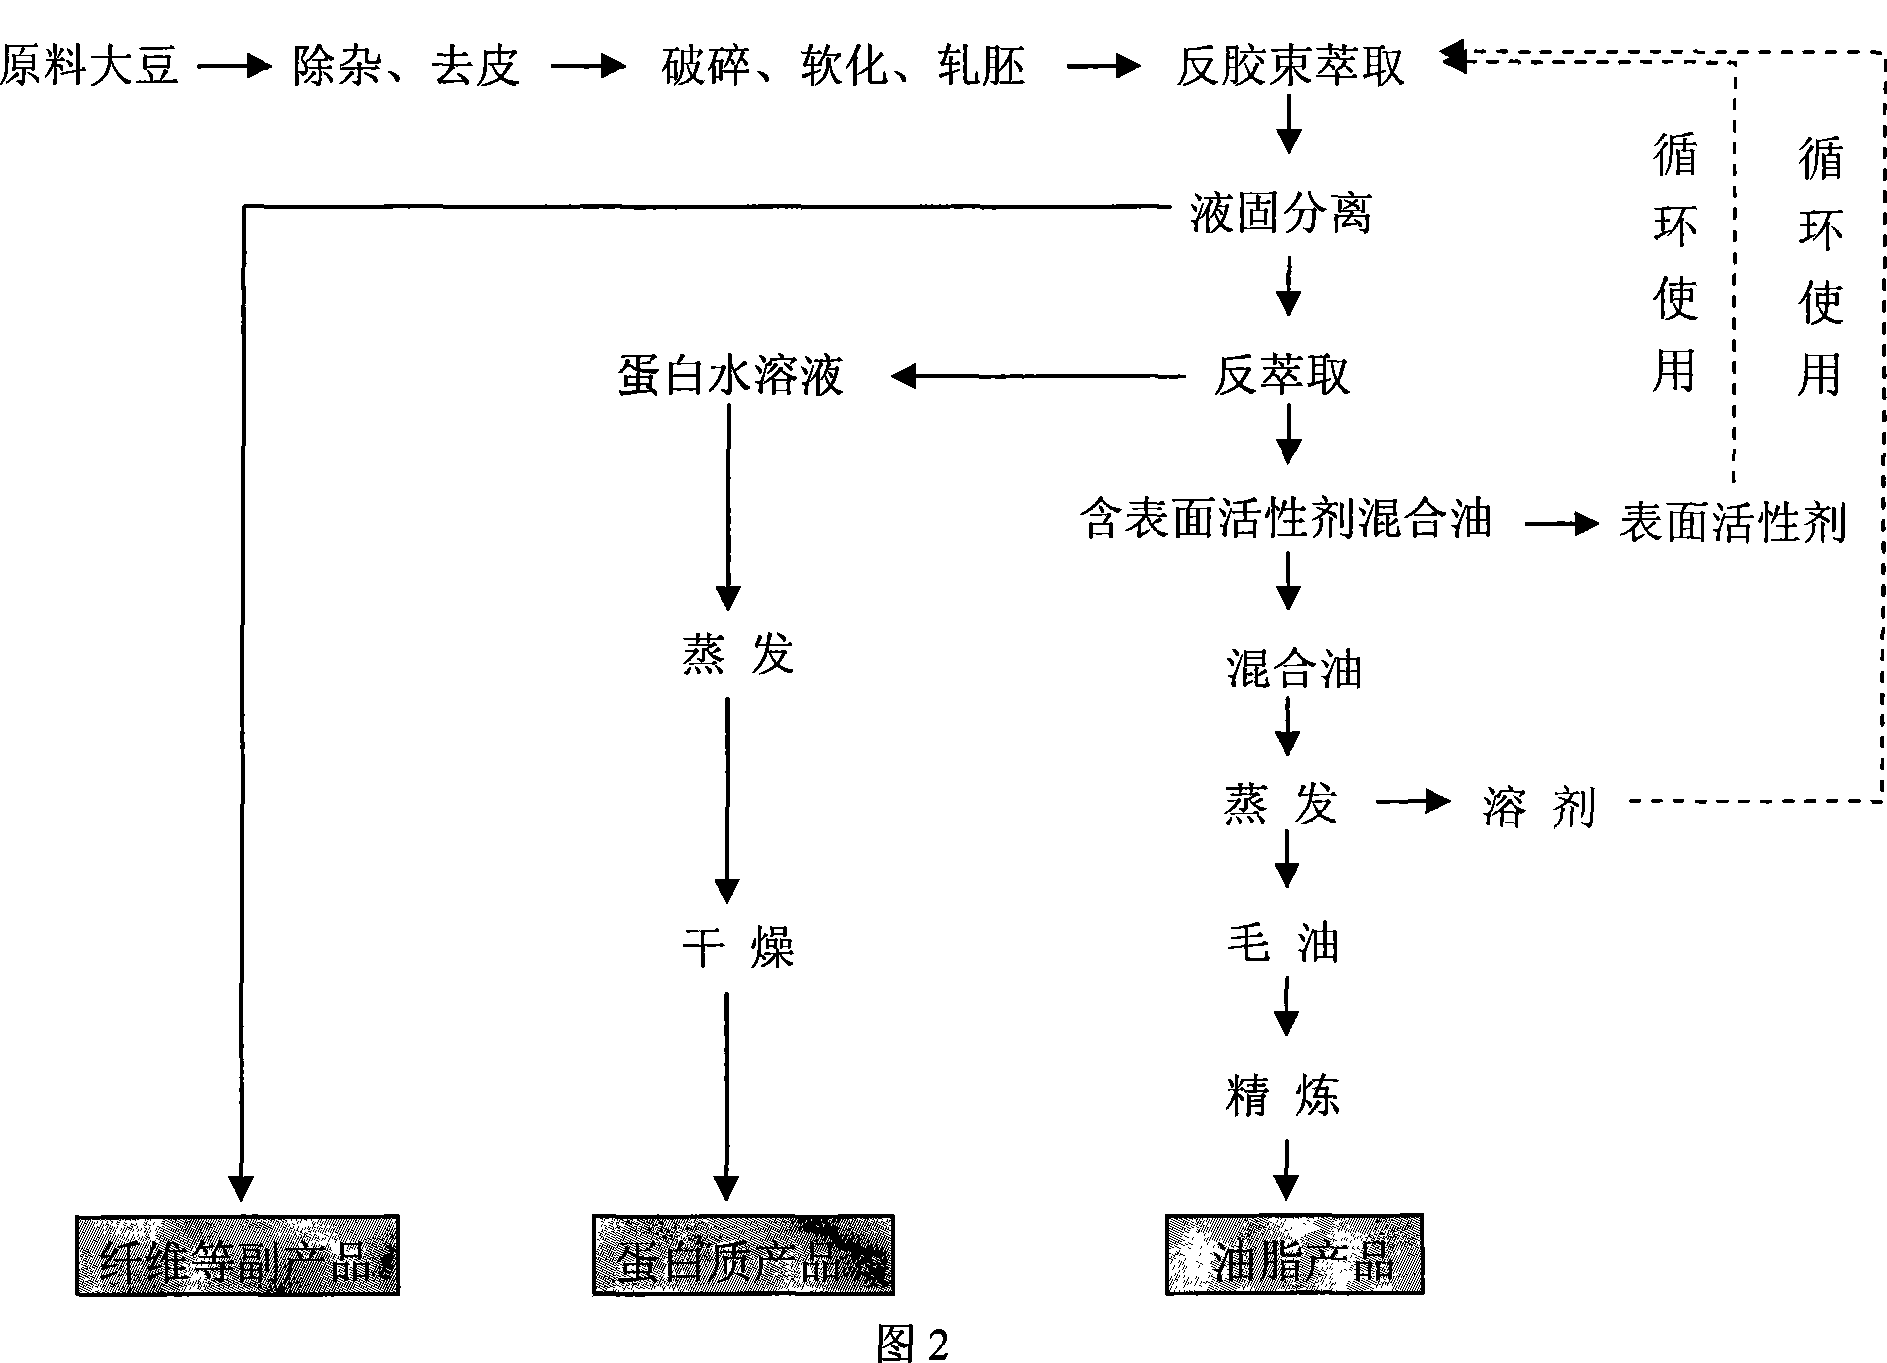 Method for simultaneously separating soy protein and oil fat with inverse micelle abstraction technique